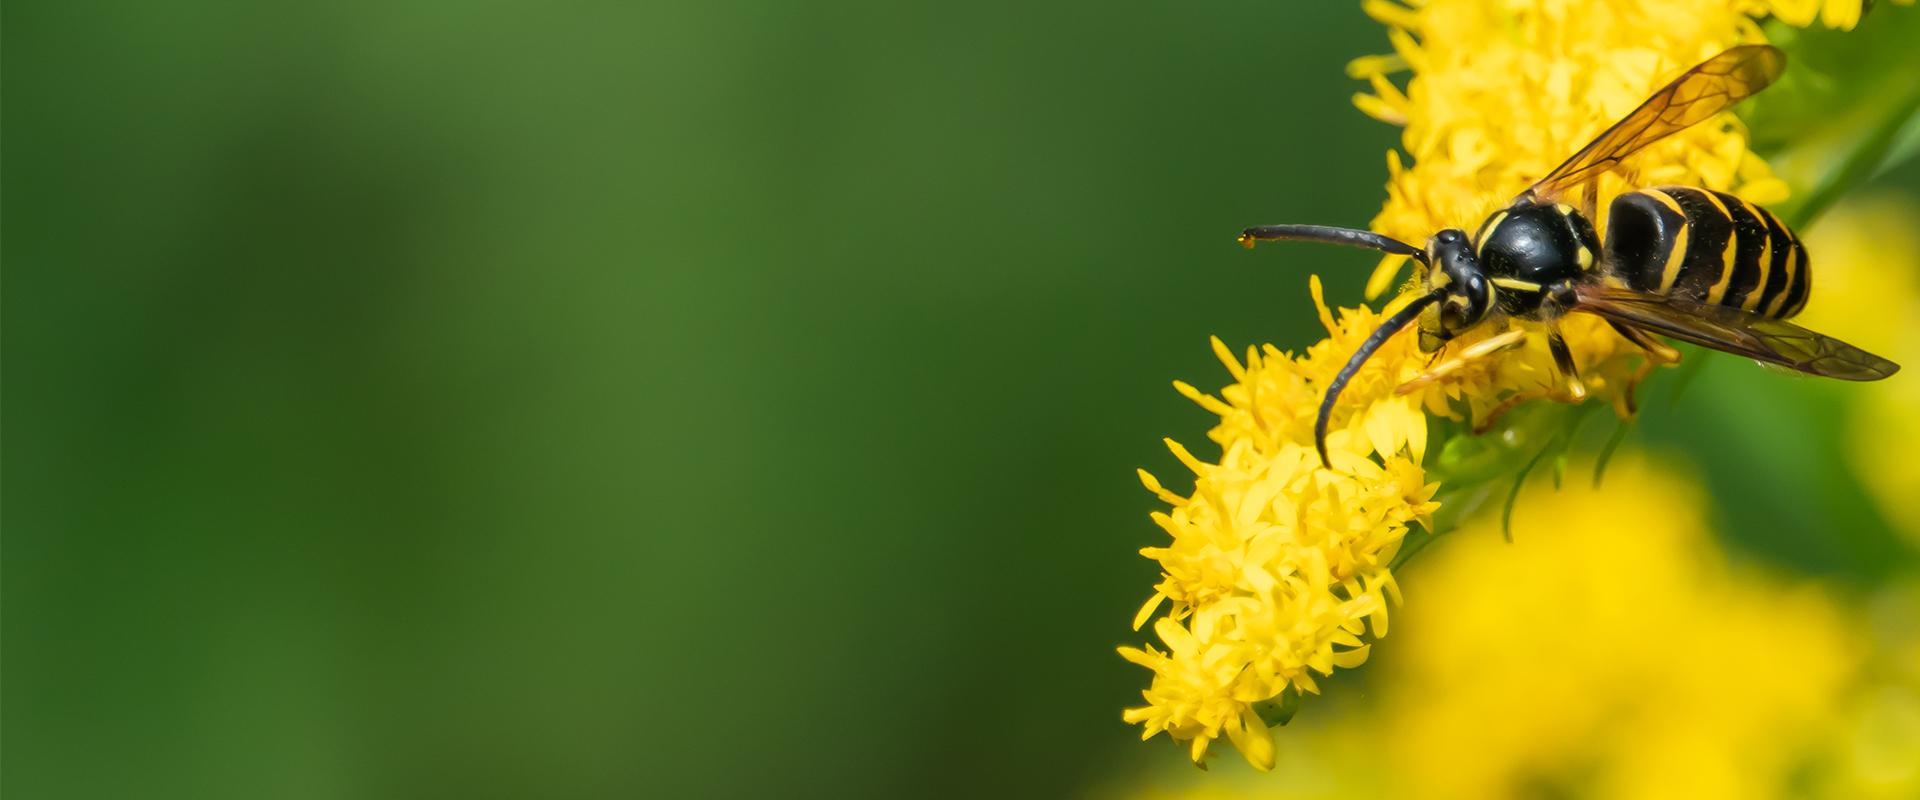 a yellow jacket on a yellow flower